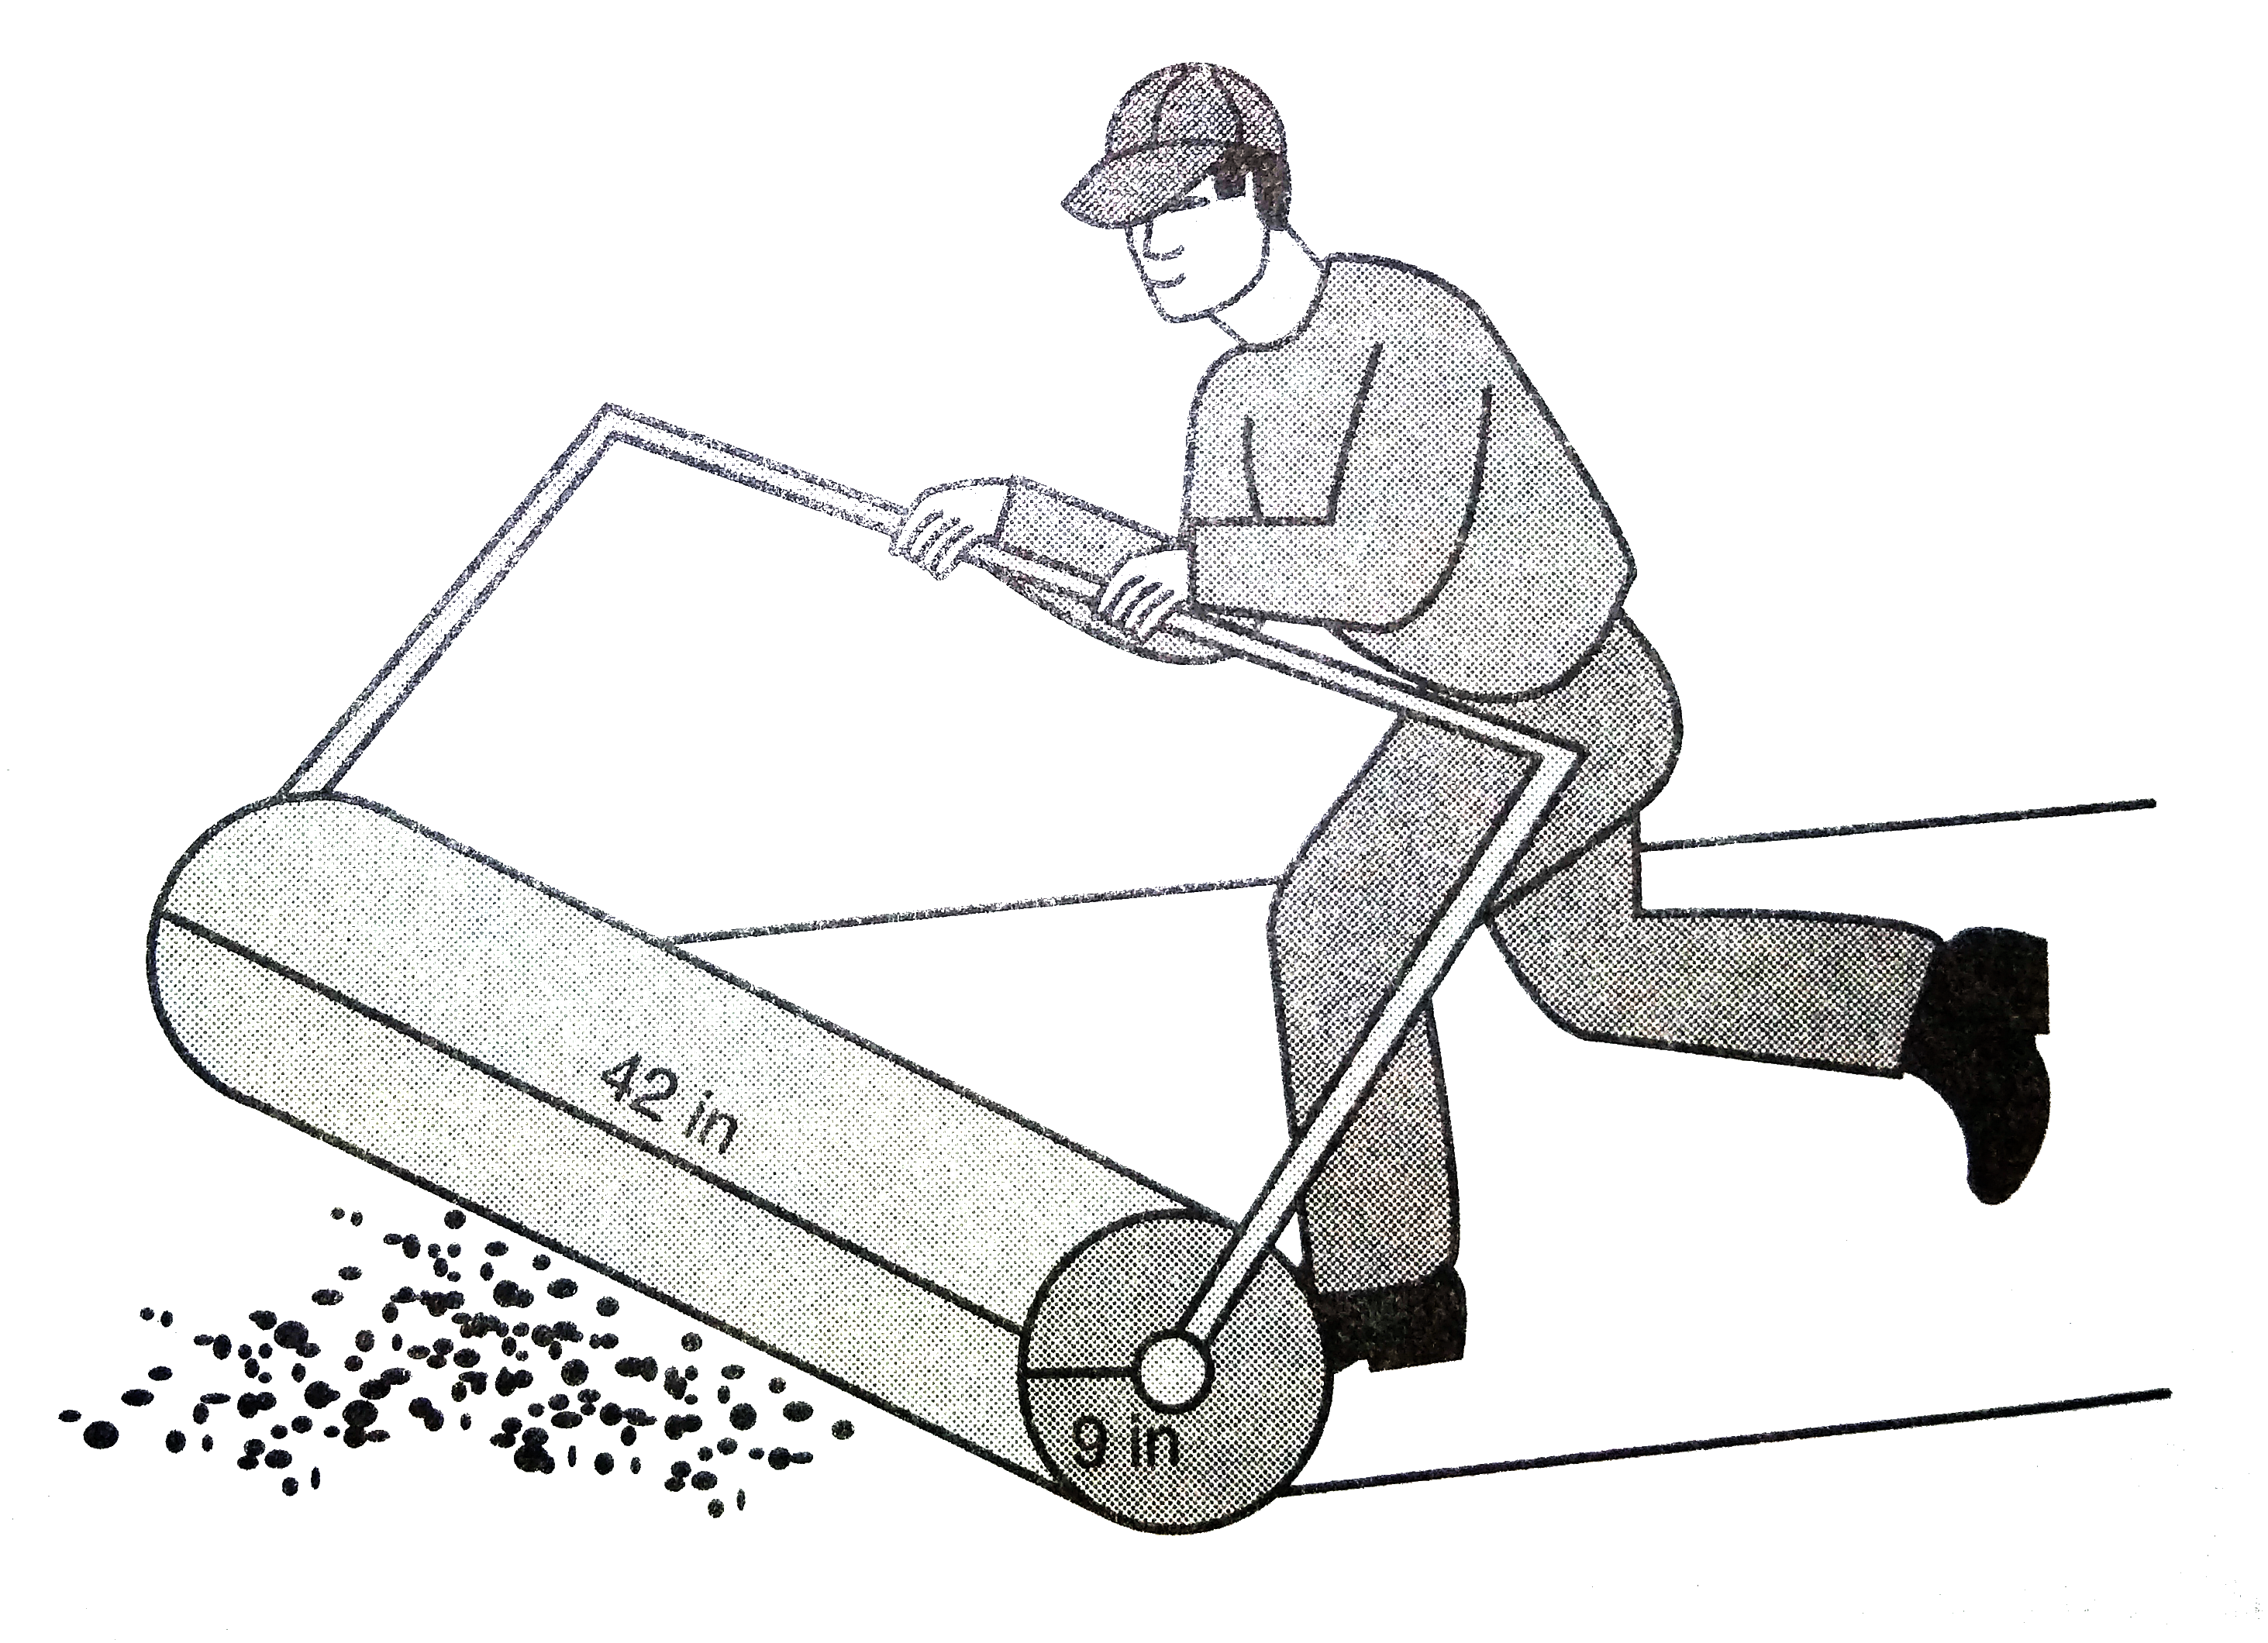 As shown in the figure above, a worker uses a cylindrical roller to help pave a road. The roller has  a radius of 9 inches and a width of 42 inches. To the nearest square inch, what is the area of the roller covers in one complete rotation?